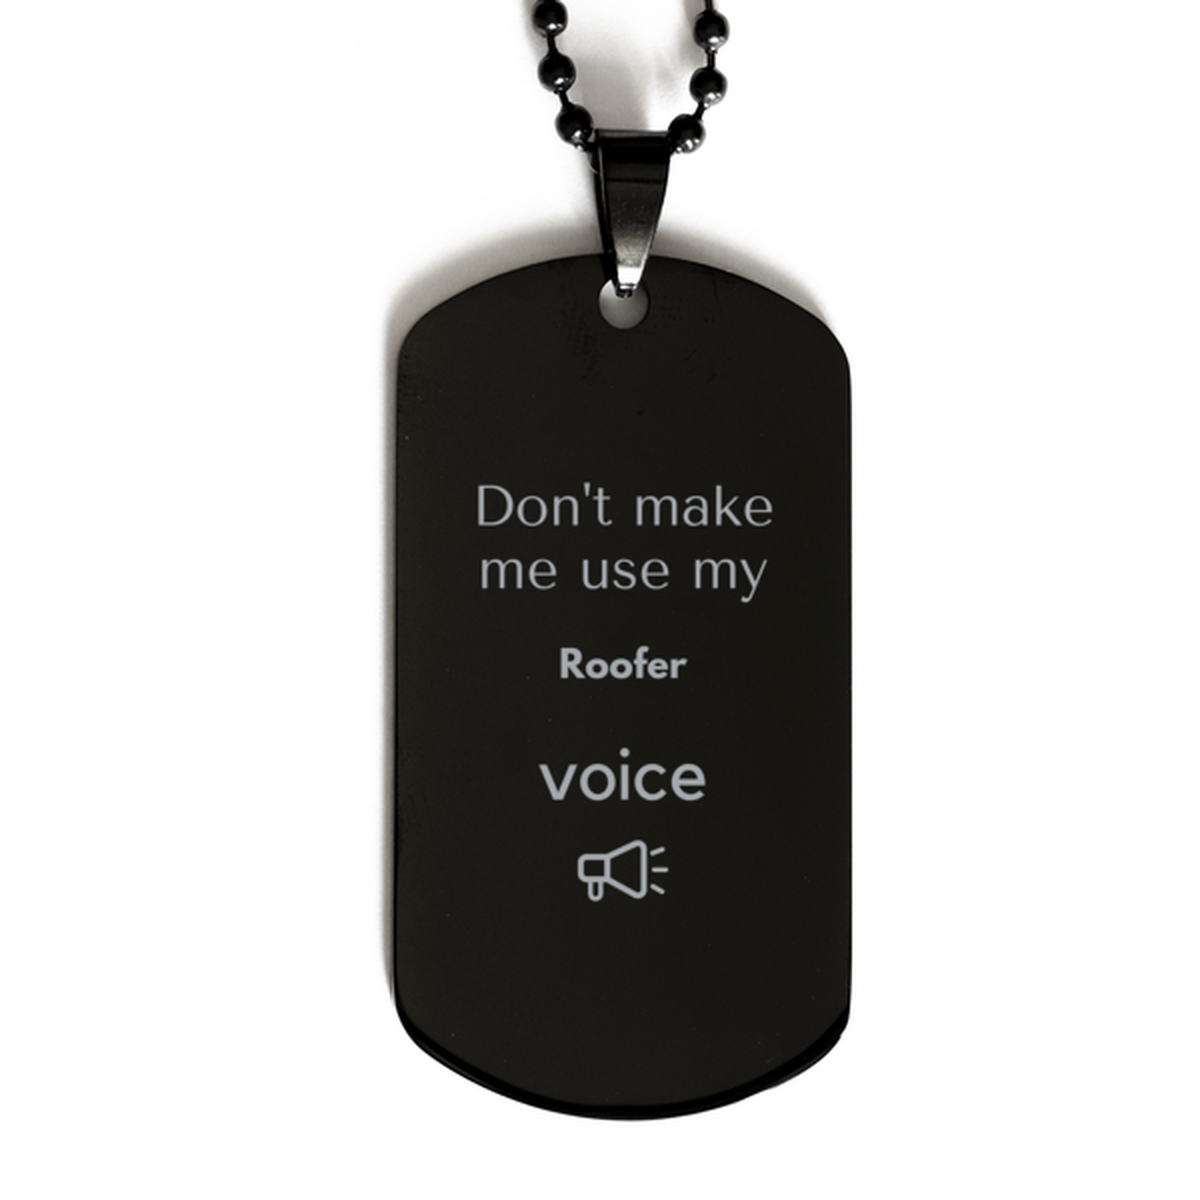 Don't make me use my Roofer voice, Sarcasm Roofer Gifts, Christmas Roofer Black Dog Tag Birthday Unique Gifts For Roofer Coworkers, Men, Women, Colleague, Friends